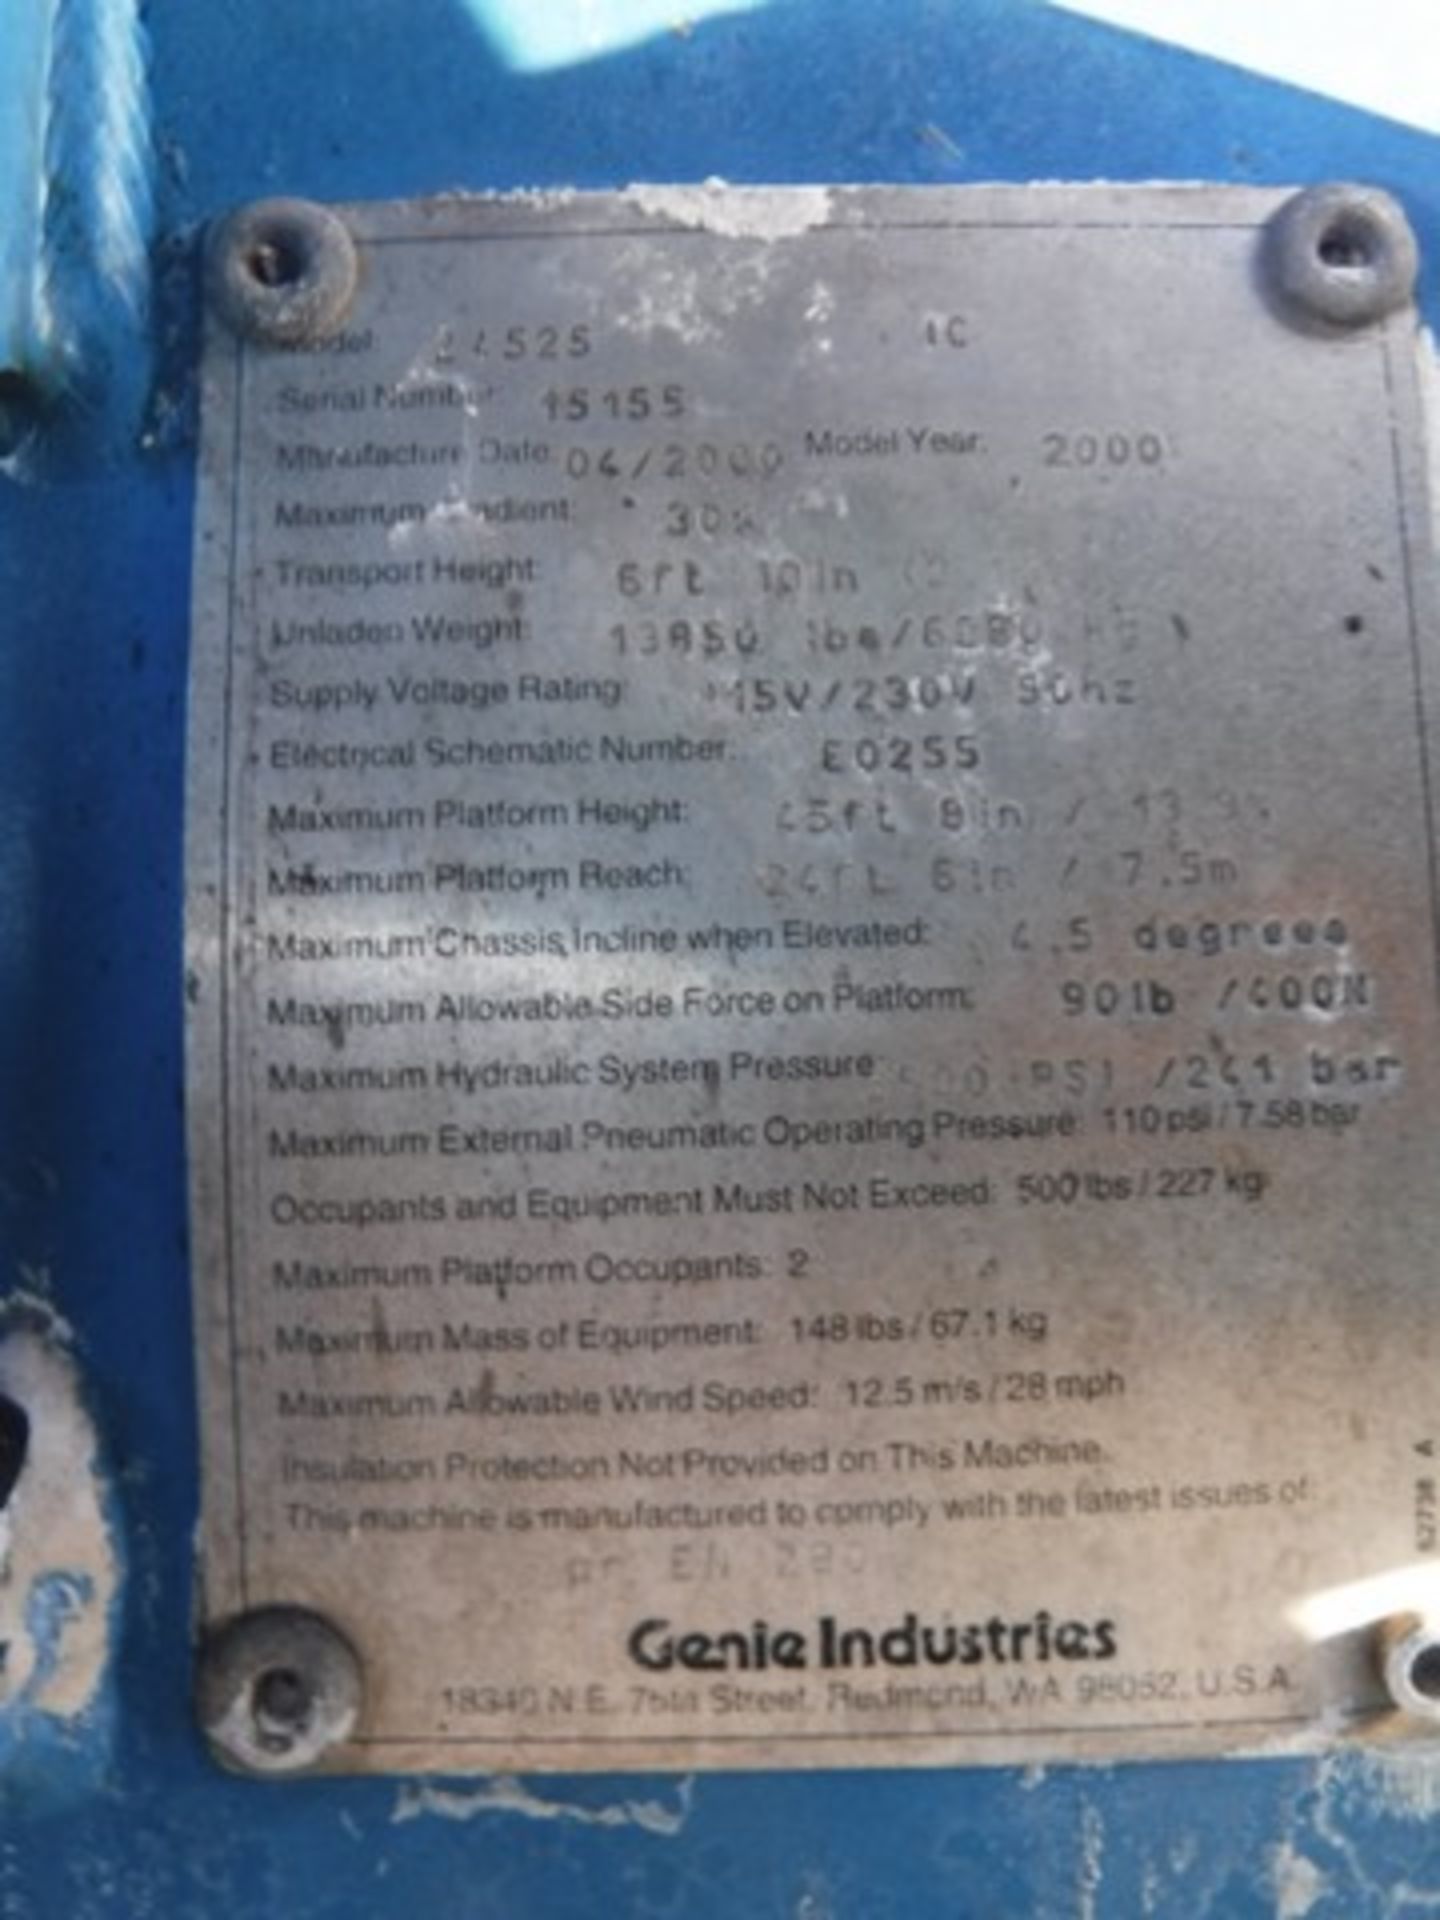 2000 GENIE MODEL Z45-25, S/N 15155, 8046HRS (NOT VERIFIED), LIFT CAPACITY - 230 - Image 5 of 17